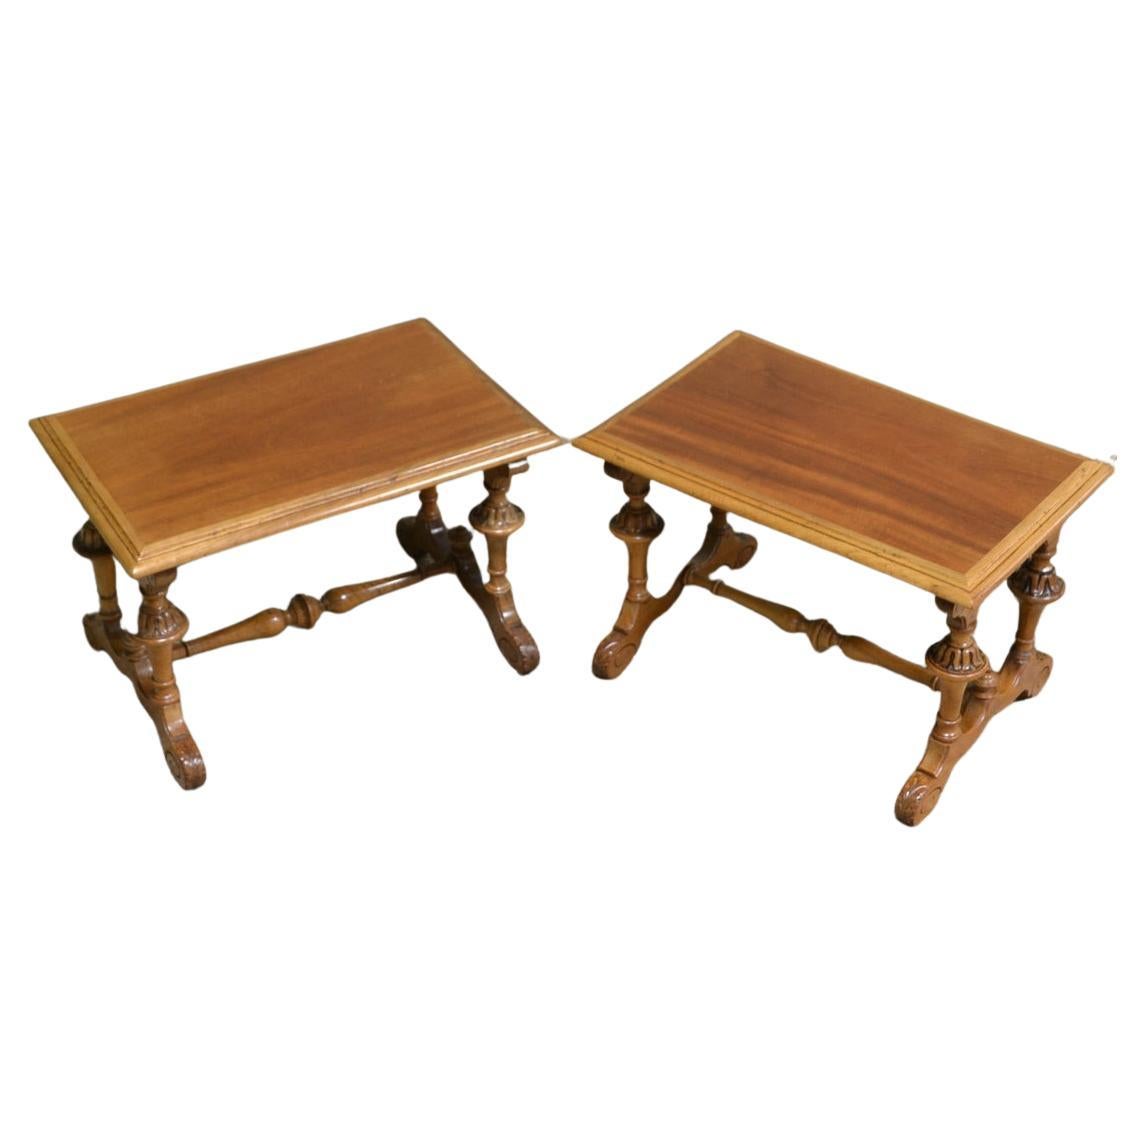 Unusual 19th Century Pair of Small Victorian Walnut Antique Coffee Tables For Sale